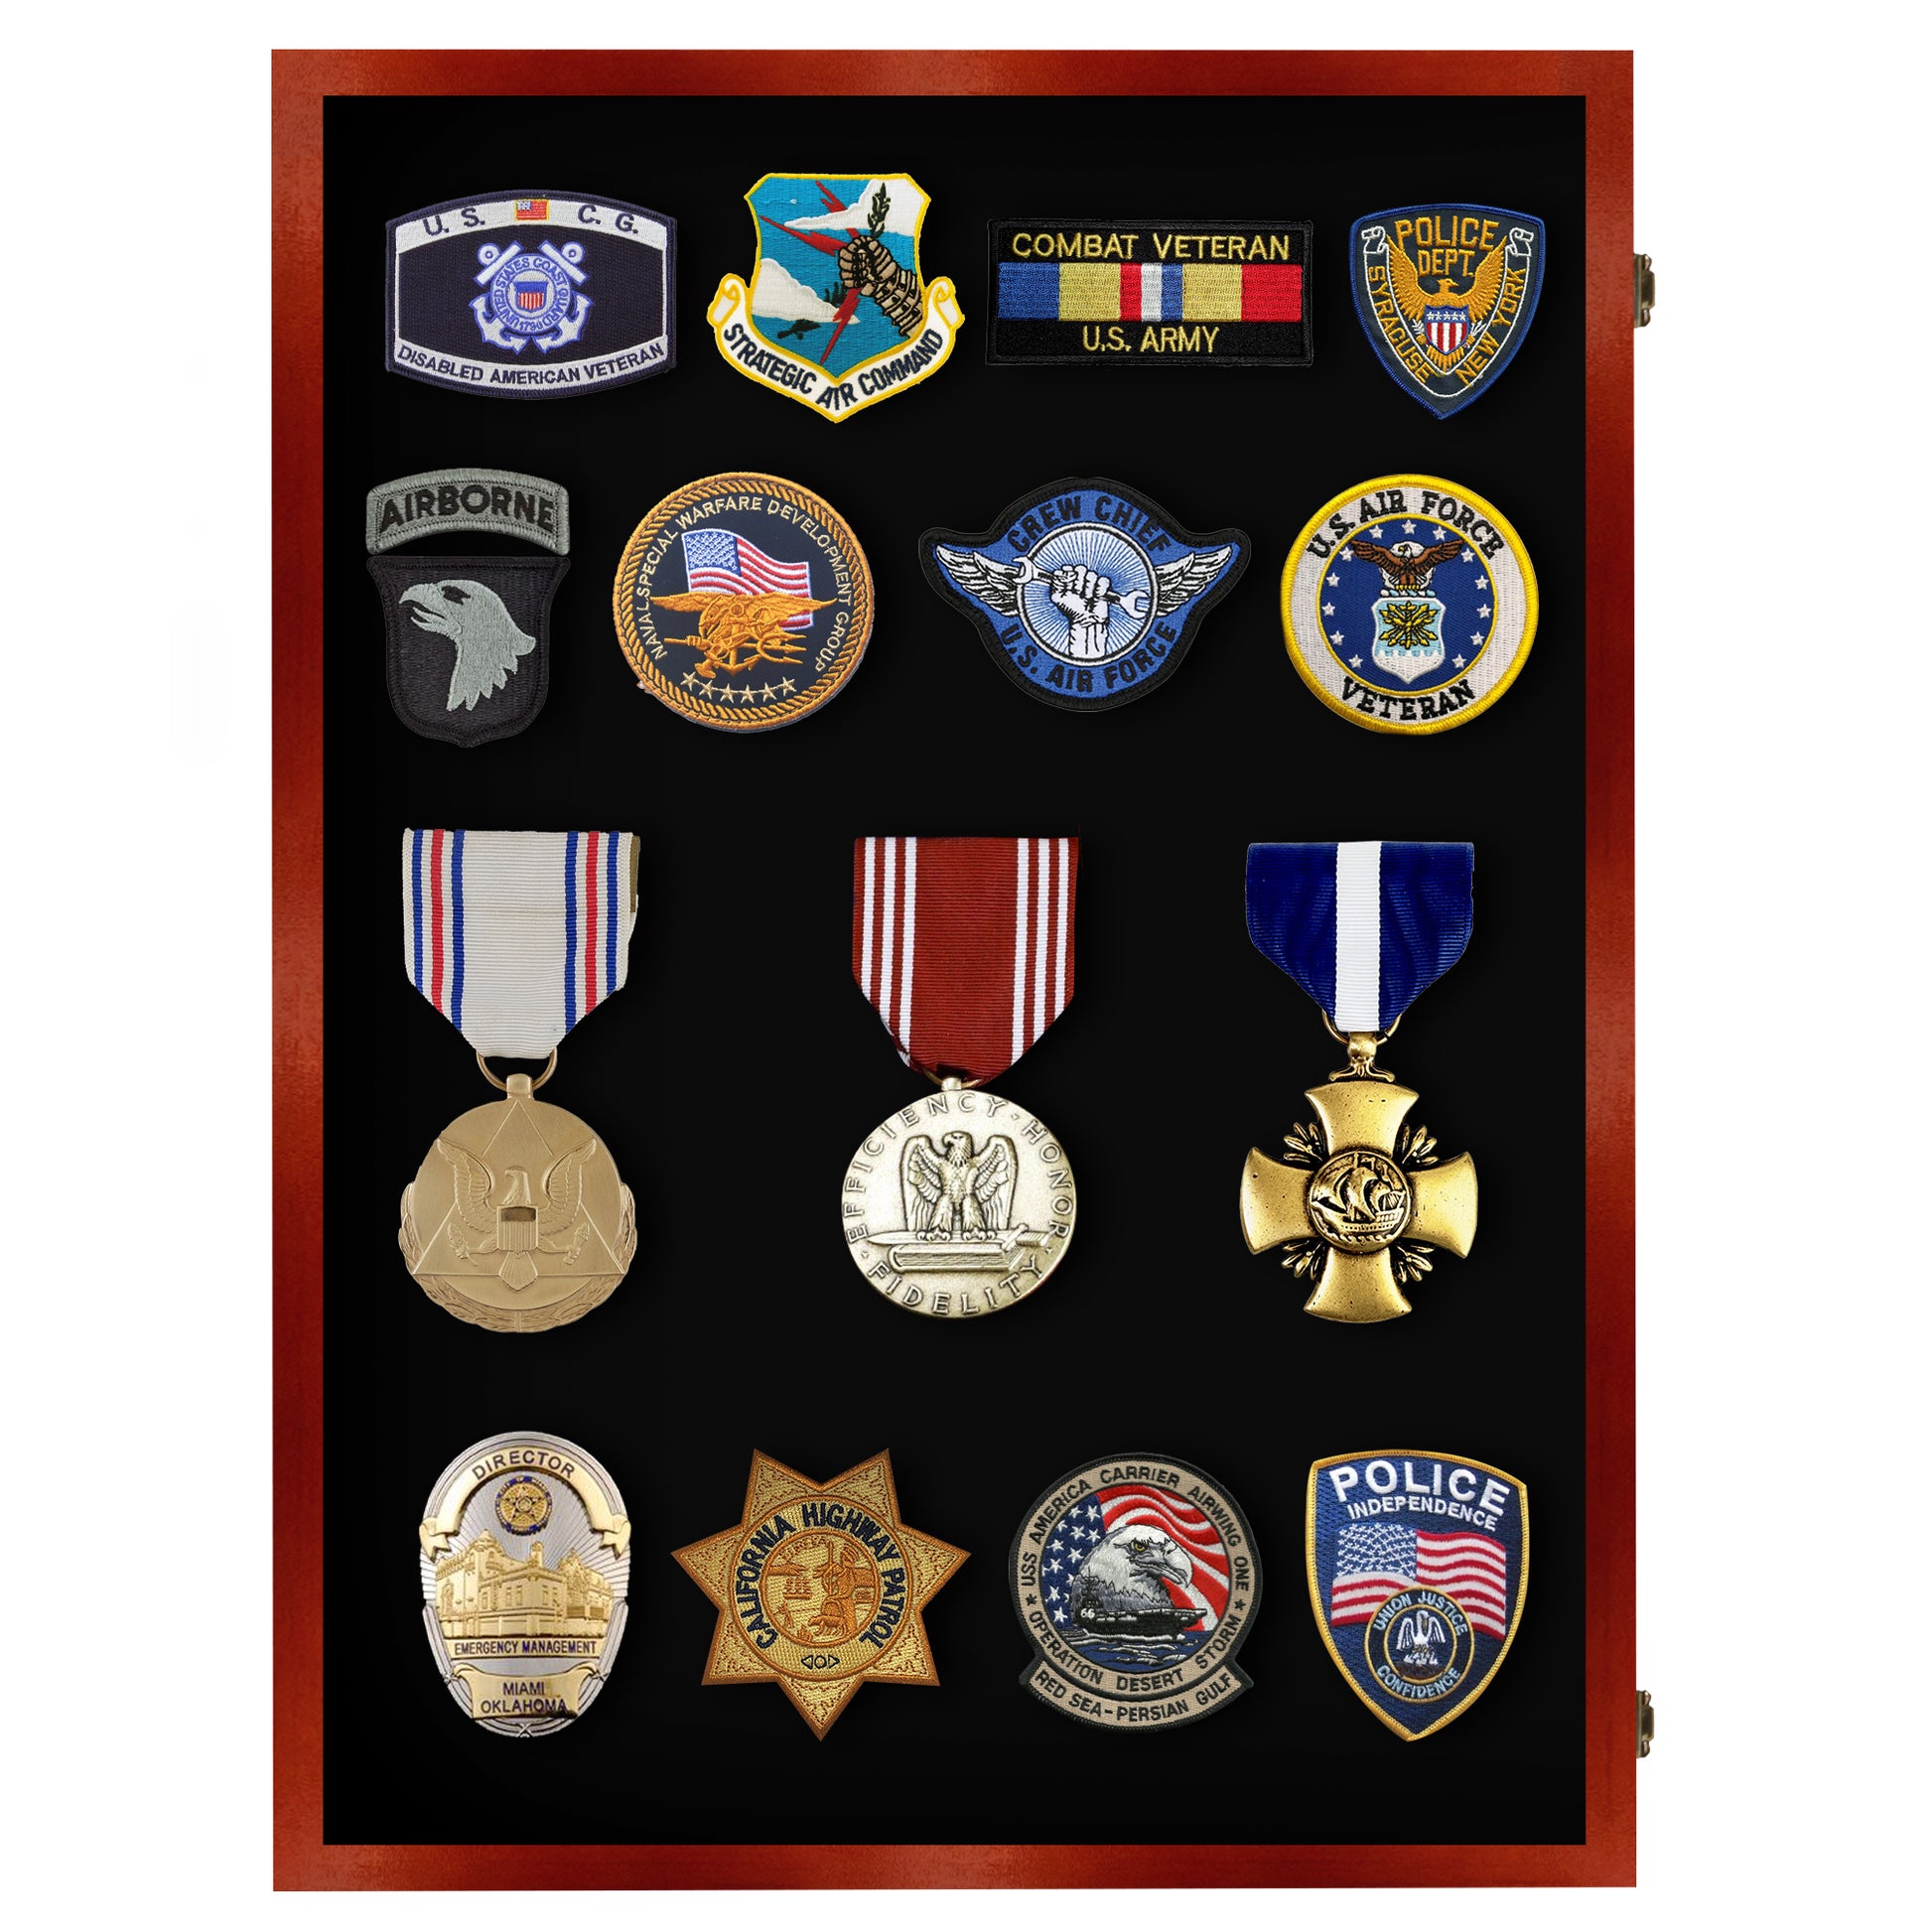 Compact Medal & Patch Display Case - Secure Showcase – pennzonidisplay